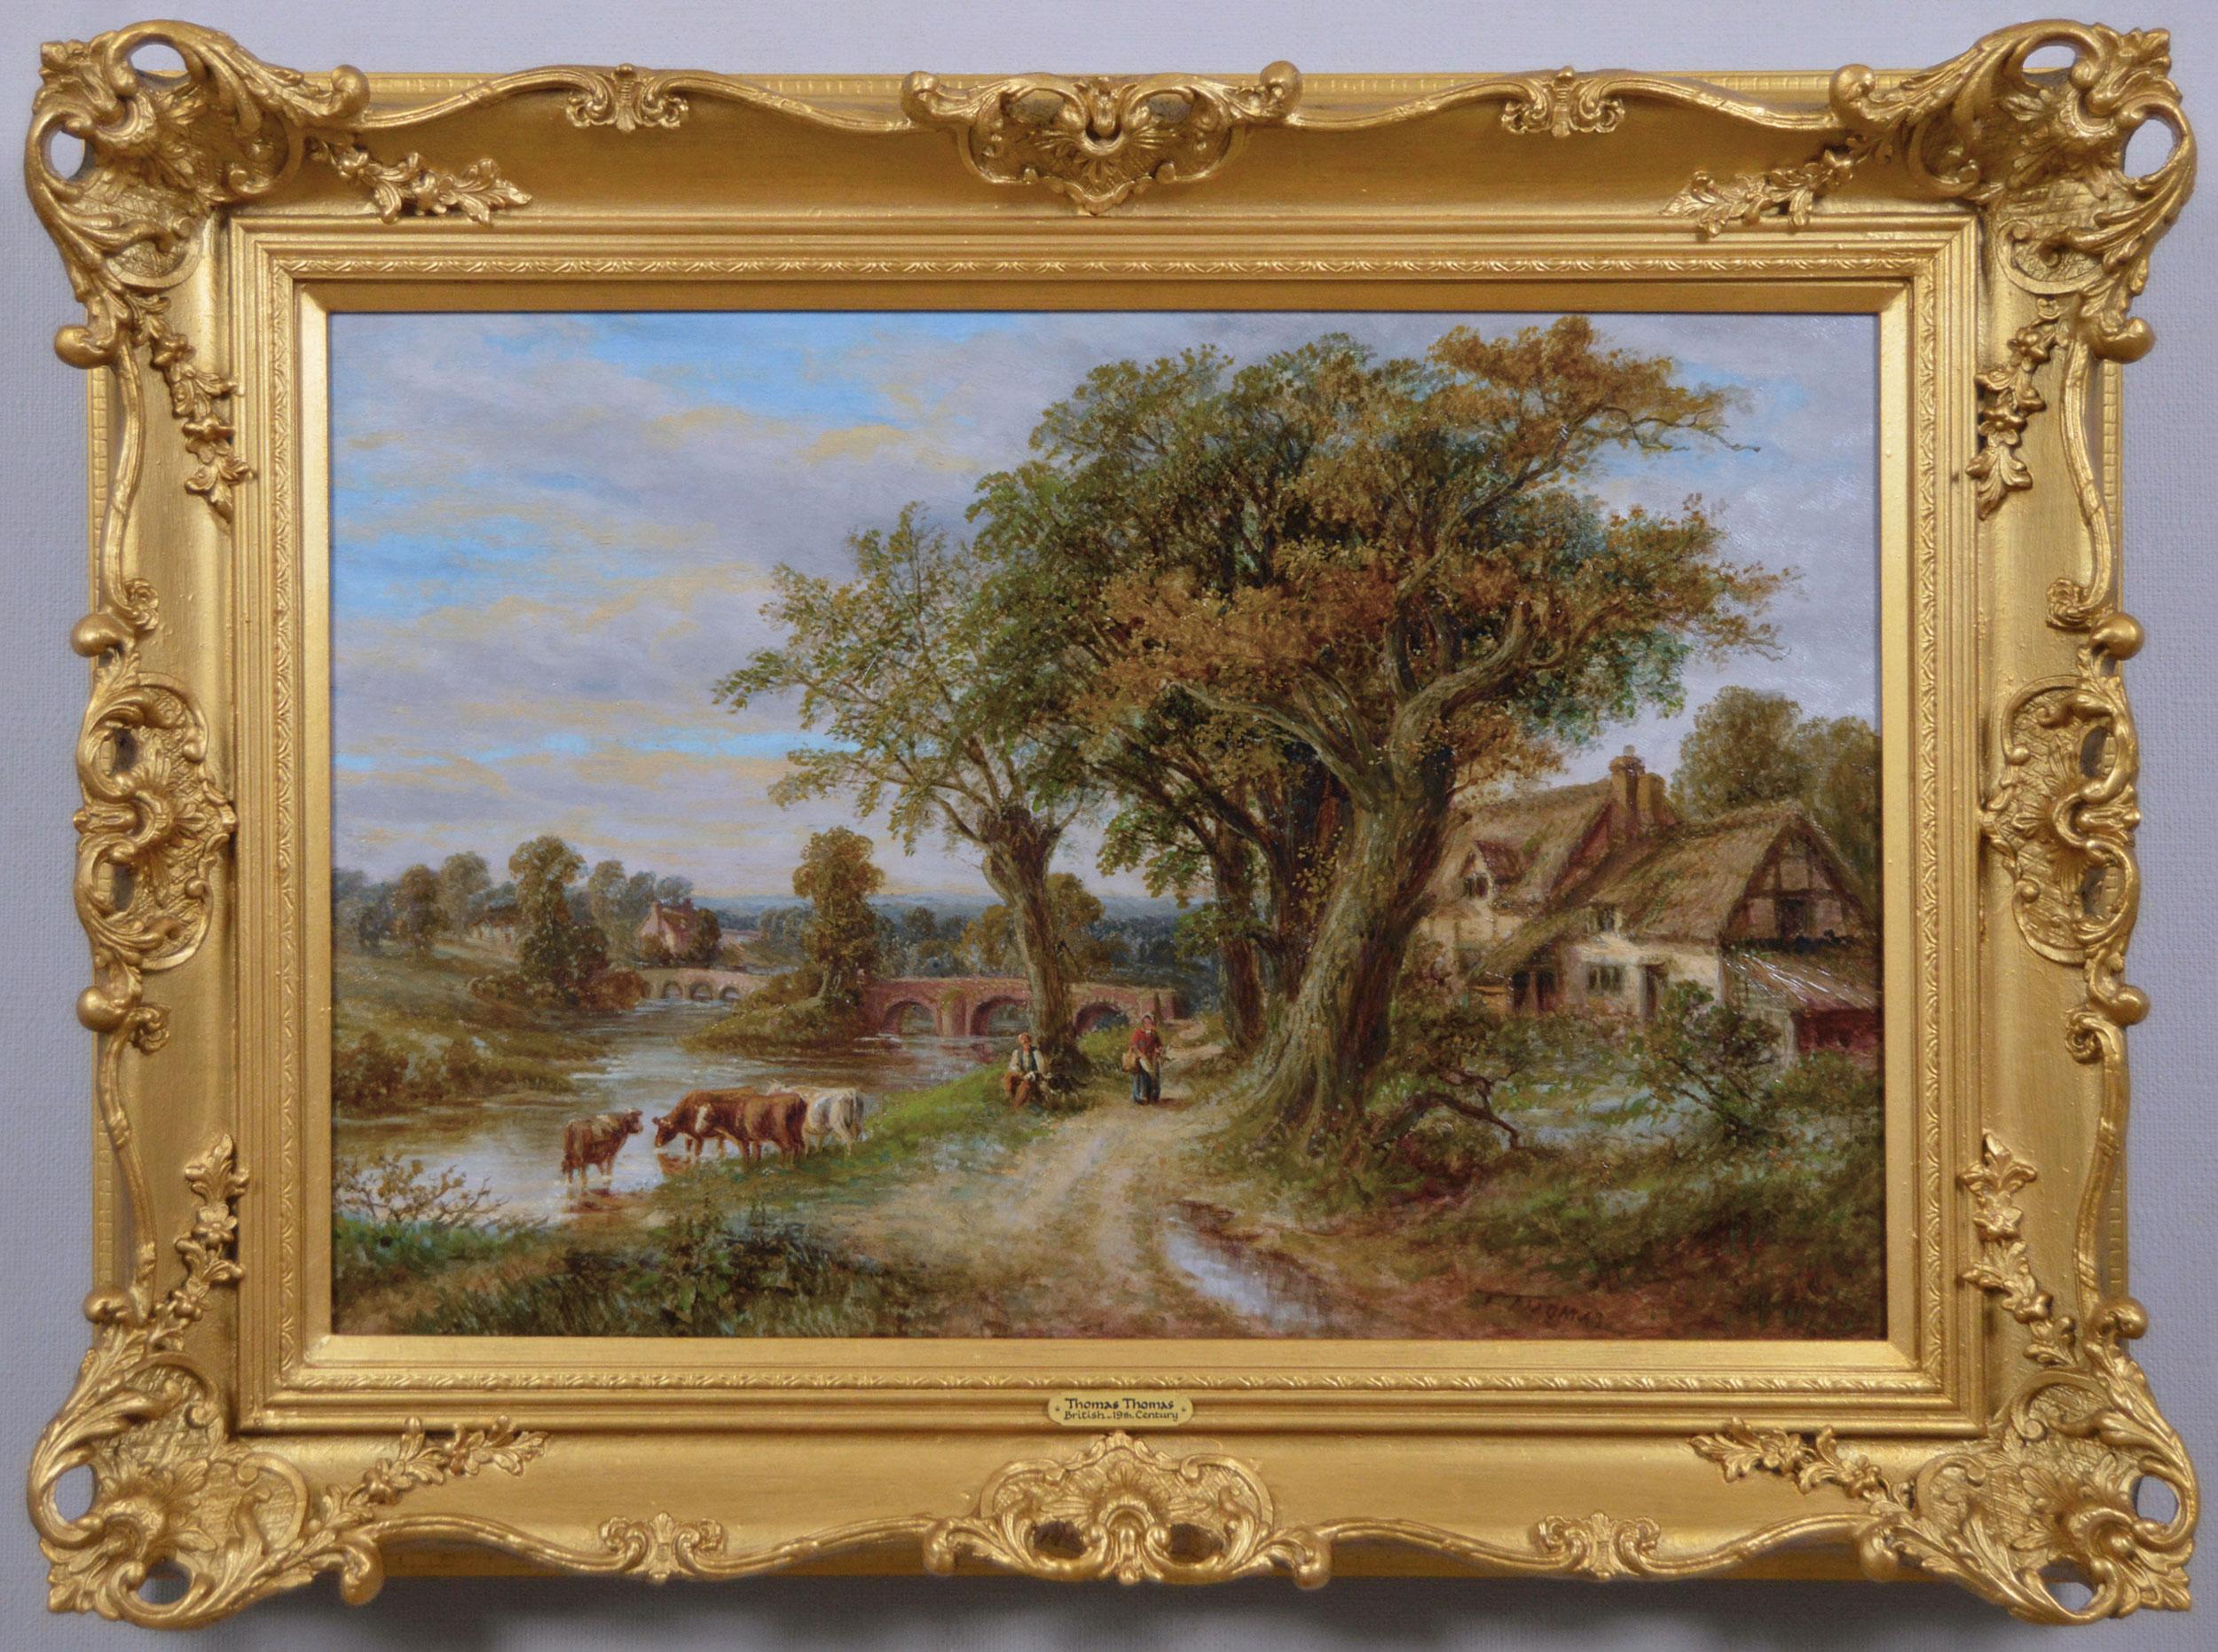 Thomas Thomas Landscape Painting - 19th Century landscape oil painting of figures with cattle near a country river